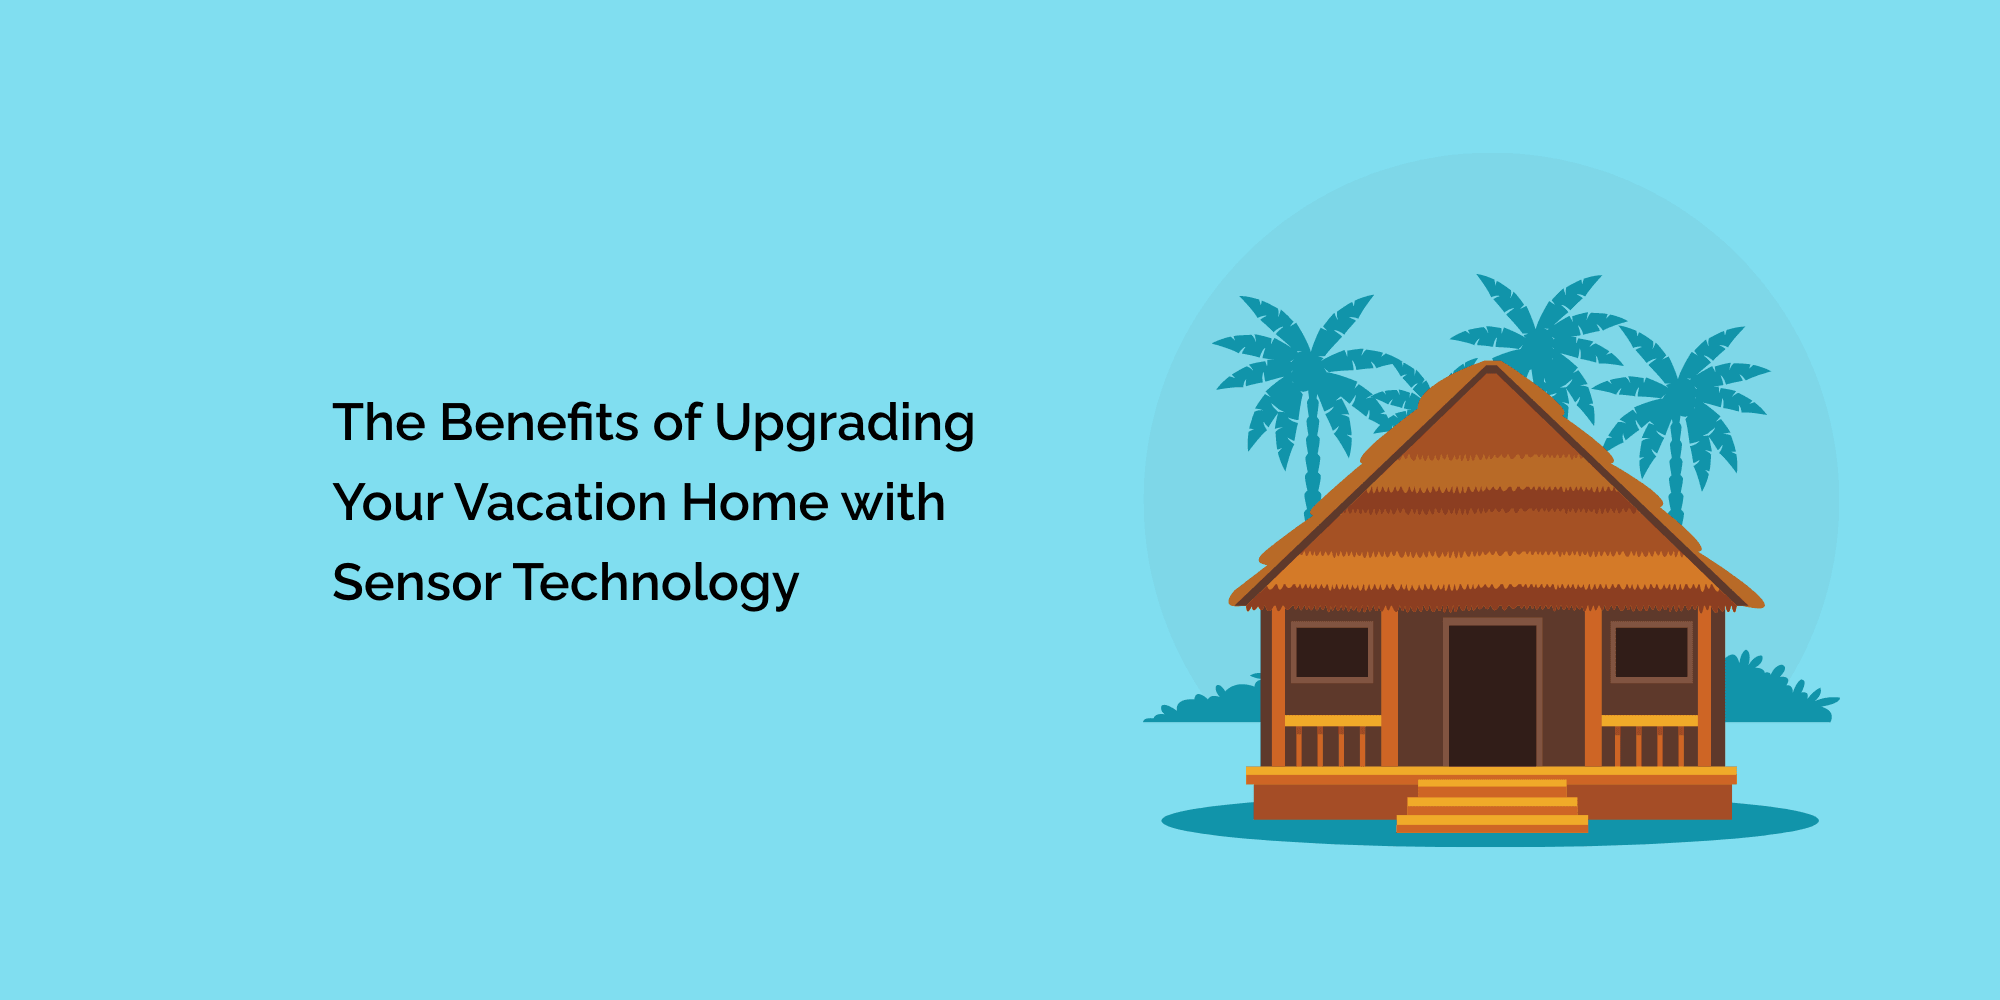 The Benefits of Upgrading Your Vacation Home with Sensor Technology